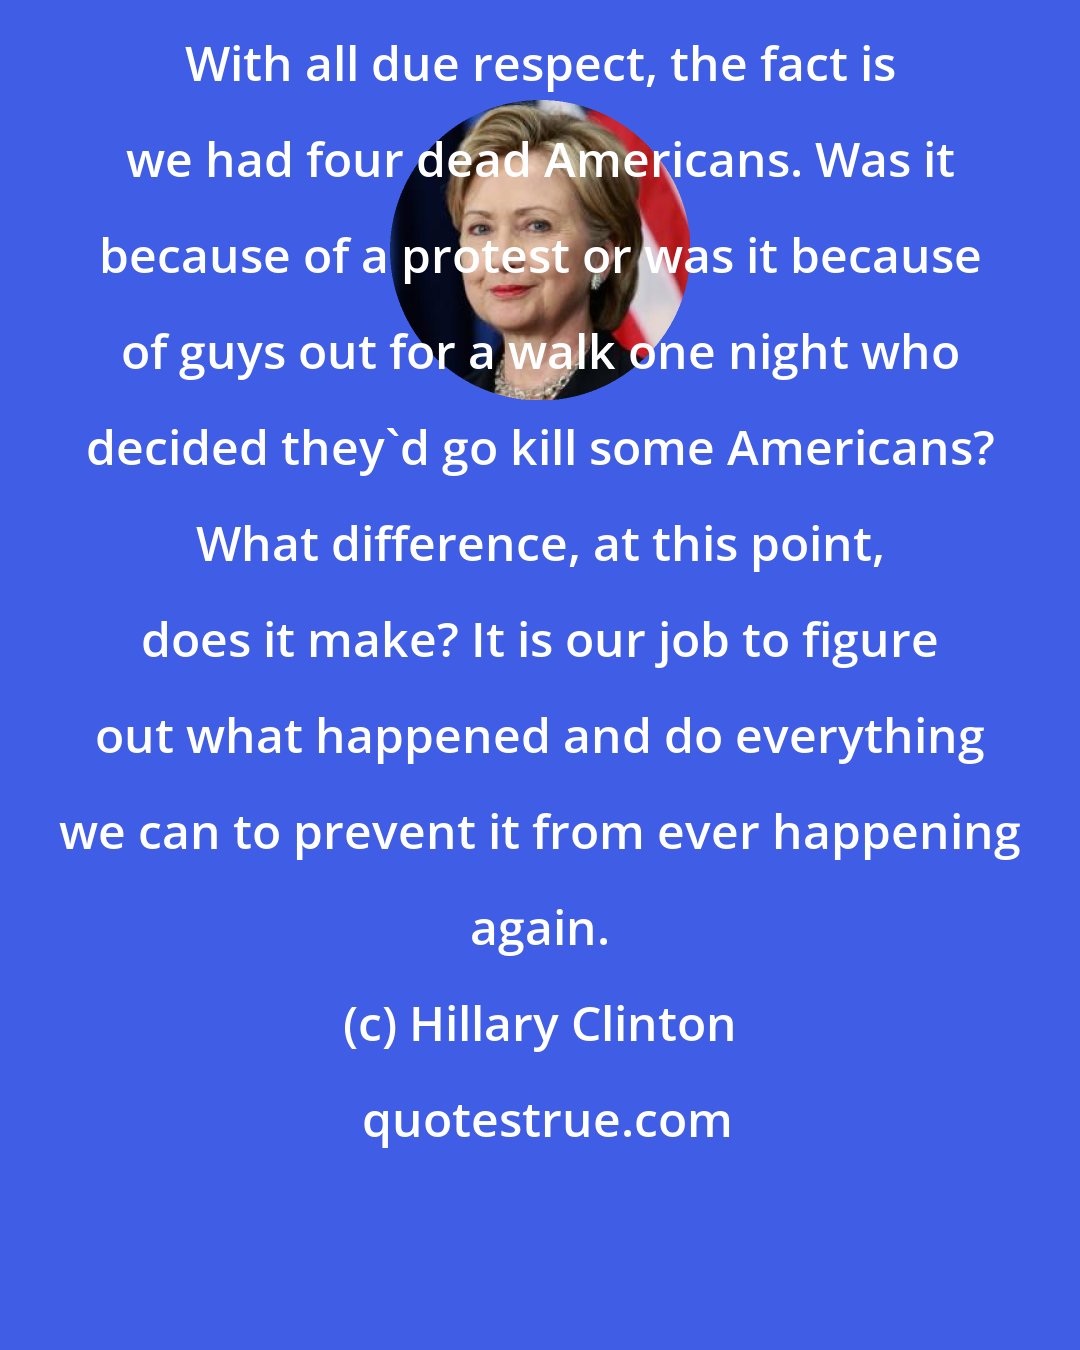 Hillary Clinton: With all due respect, the fact is we had four dead Americans. Was it because of a protest or was it because of guys out for a walk one night who decided they'd go kill some Americans? What difference, at this point, does it make? It is our job to figure out what happened and do everything we can to prevent it from ever happening again.